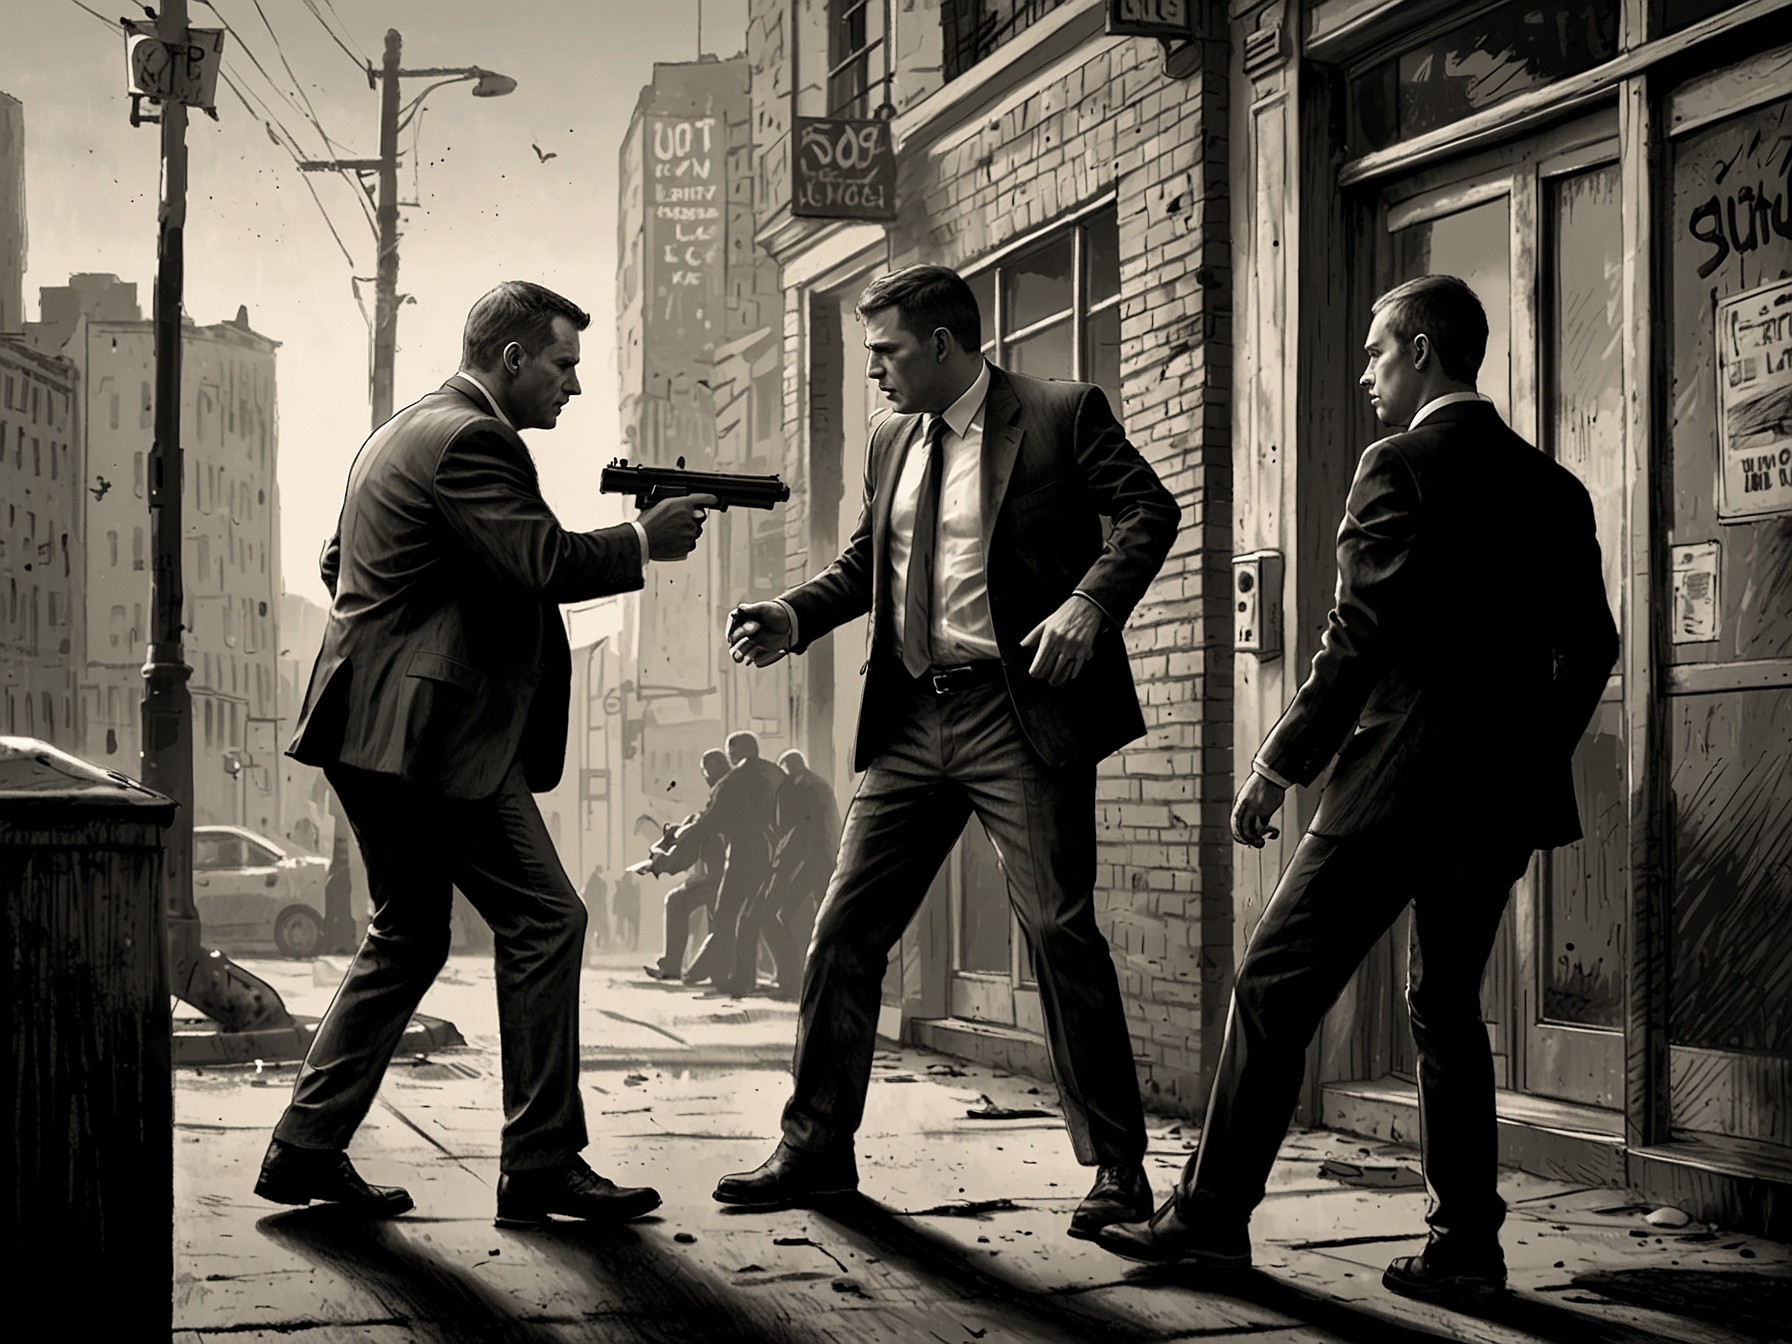 An illustration depicting a tense early morning scene where an off-duty Secret Service agent is confronted by two armed assailants, capturing the urgency and danger of the incident.